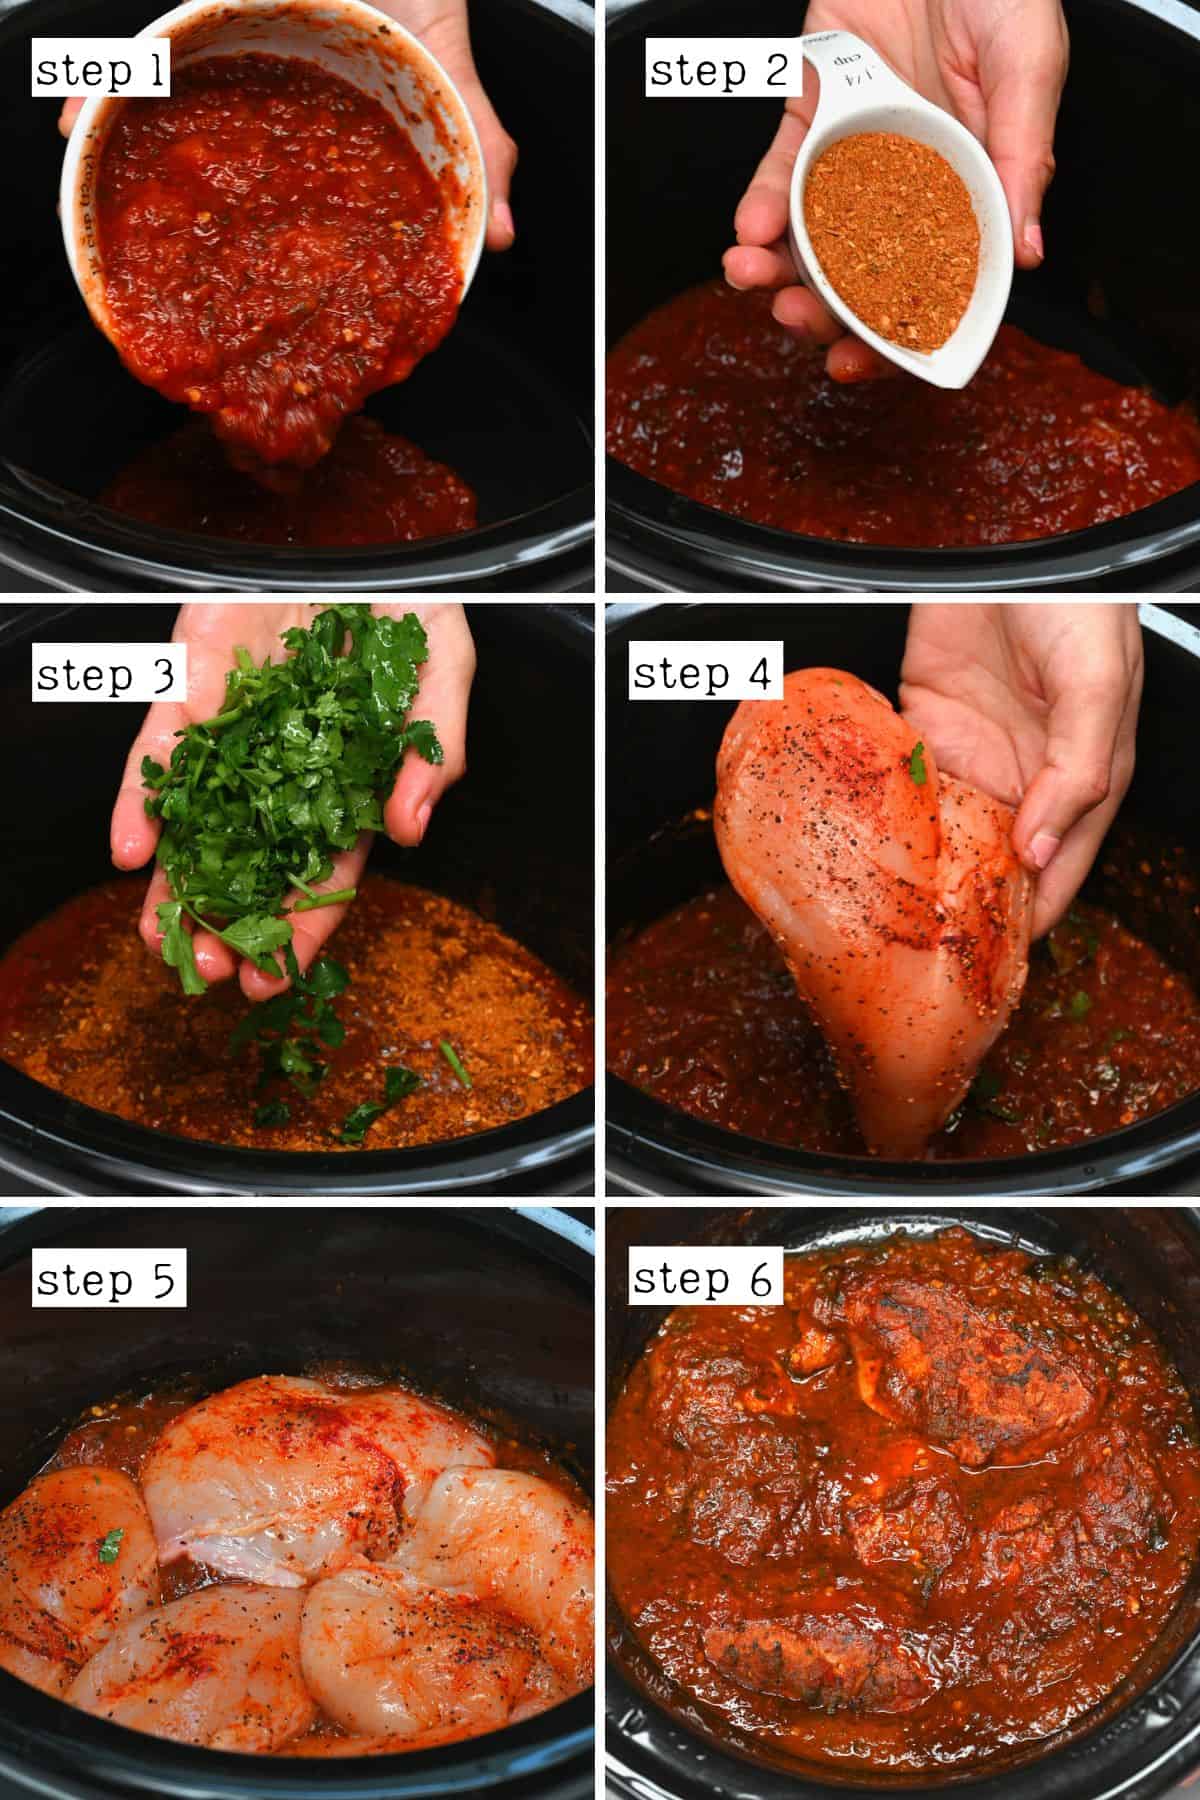 Steps for cooking chicken in a crockpot